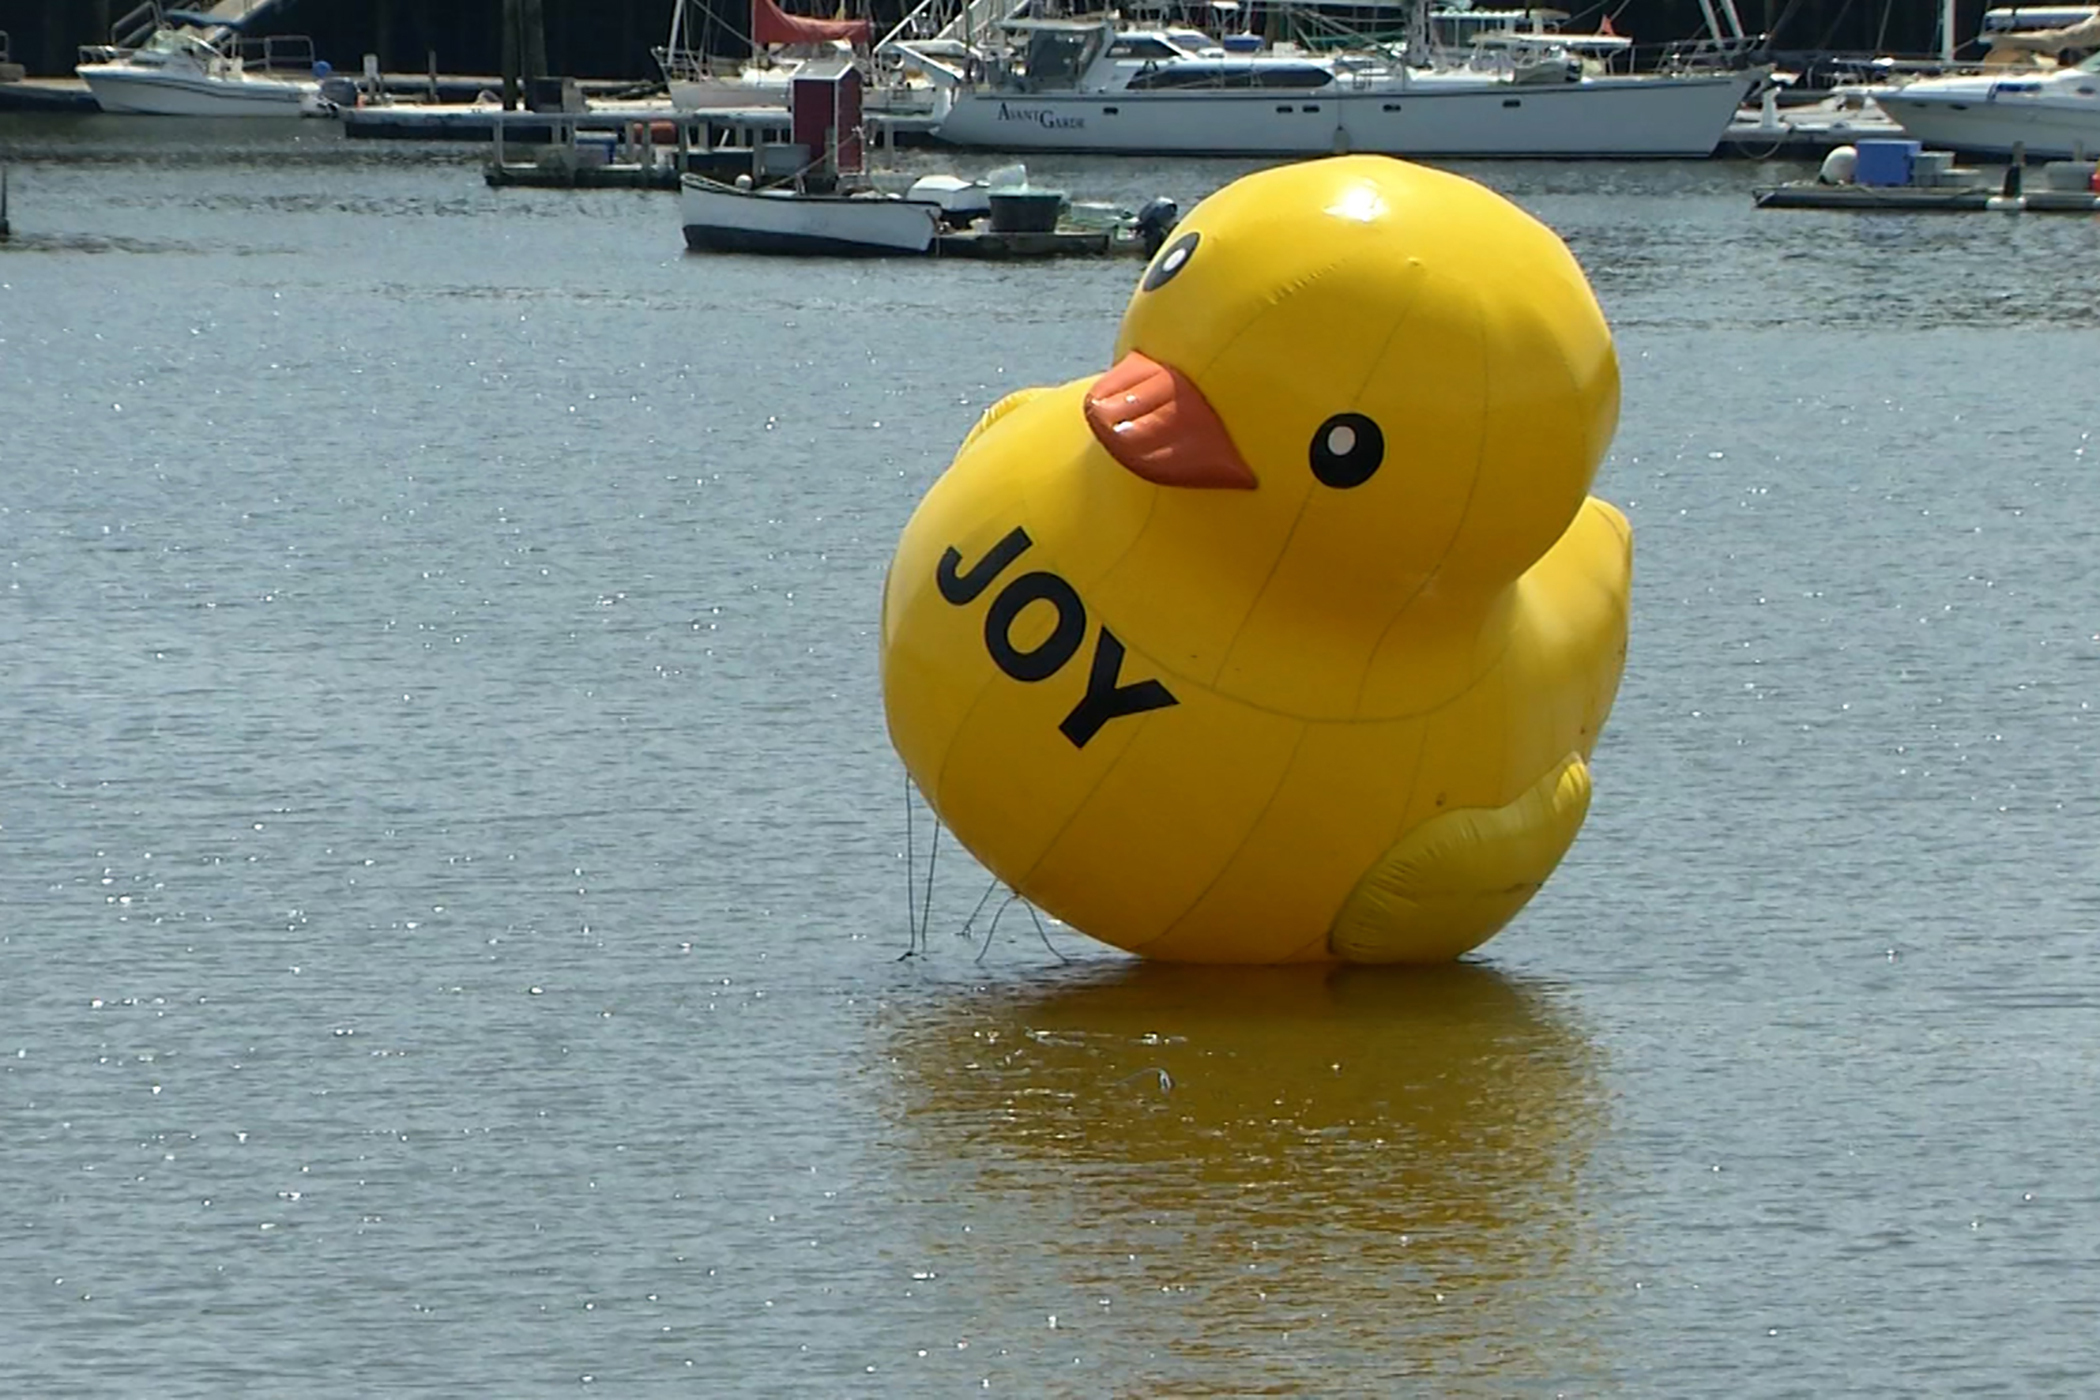 A giant rubber ducky floats in Belfast Harbor, Tuesday, Aug, 17, 2021, in Belfast, Maine. Harbor Master Katherine Given says it's a mystery who put it there, but that the 25-foot-tall duck doesn't pose a navigational hazard so there's no rush to shoo it away. (New England Cable News/Kenn Tompkins via AP)